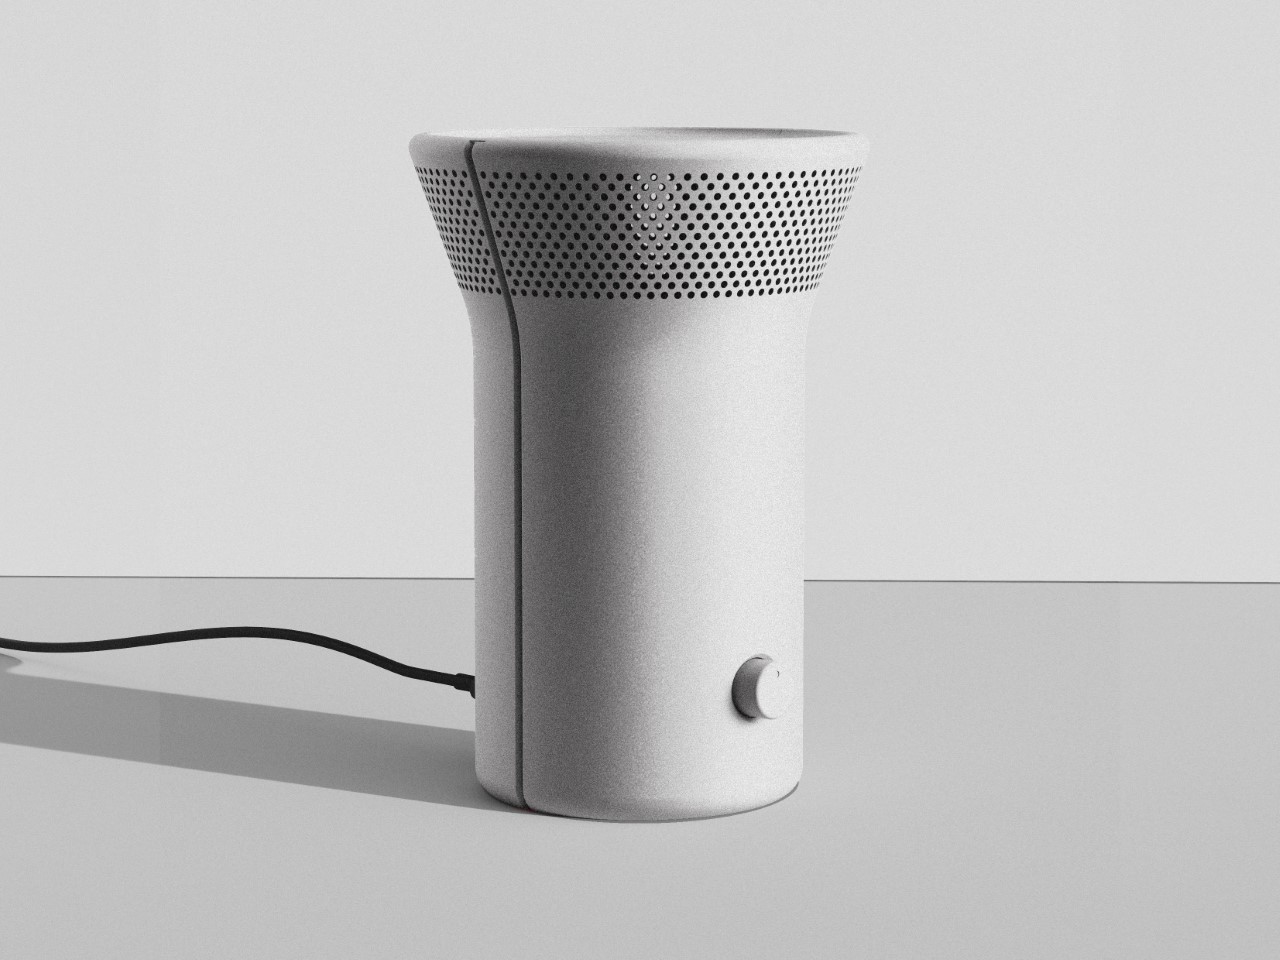 Exploring 4 Types of Sustainability through 4 different smart-speaker designs that embrace the circular economy